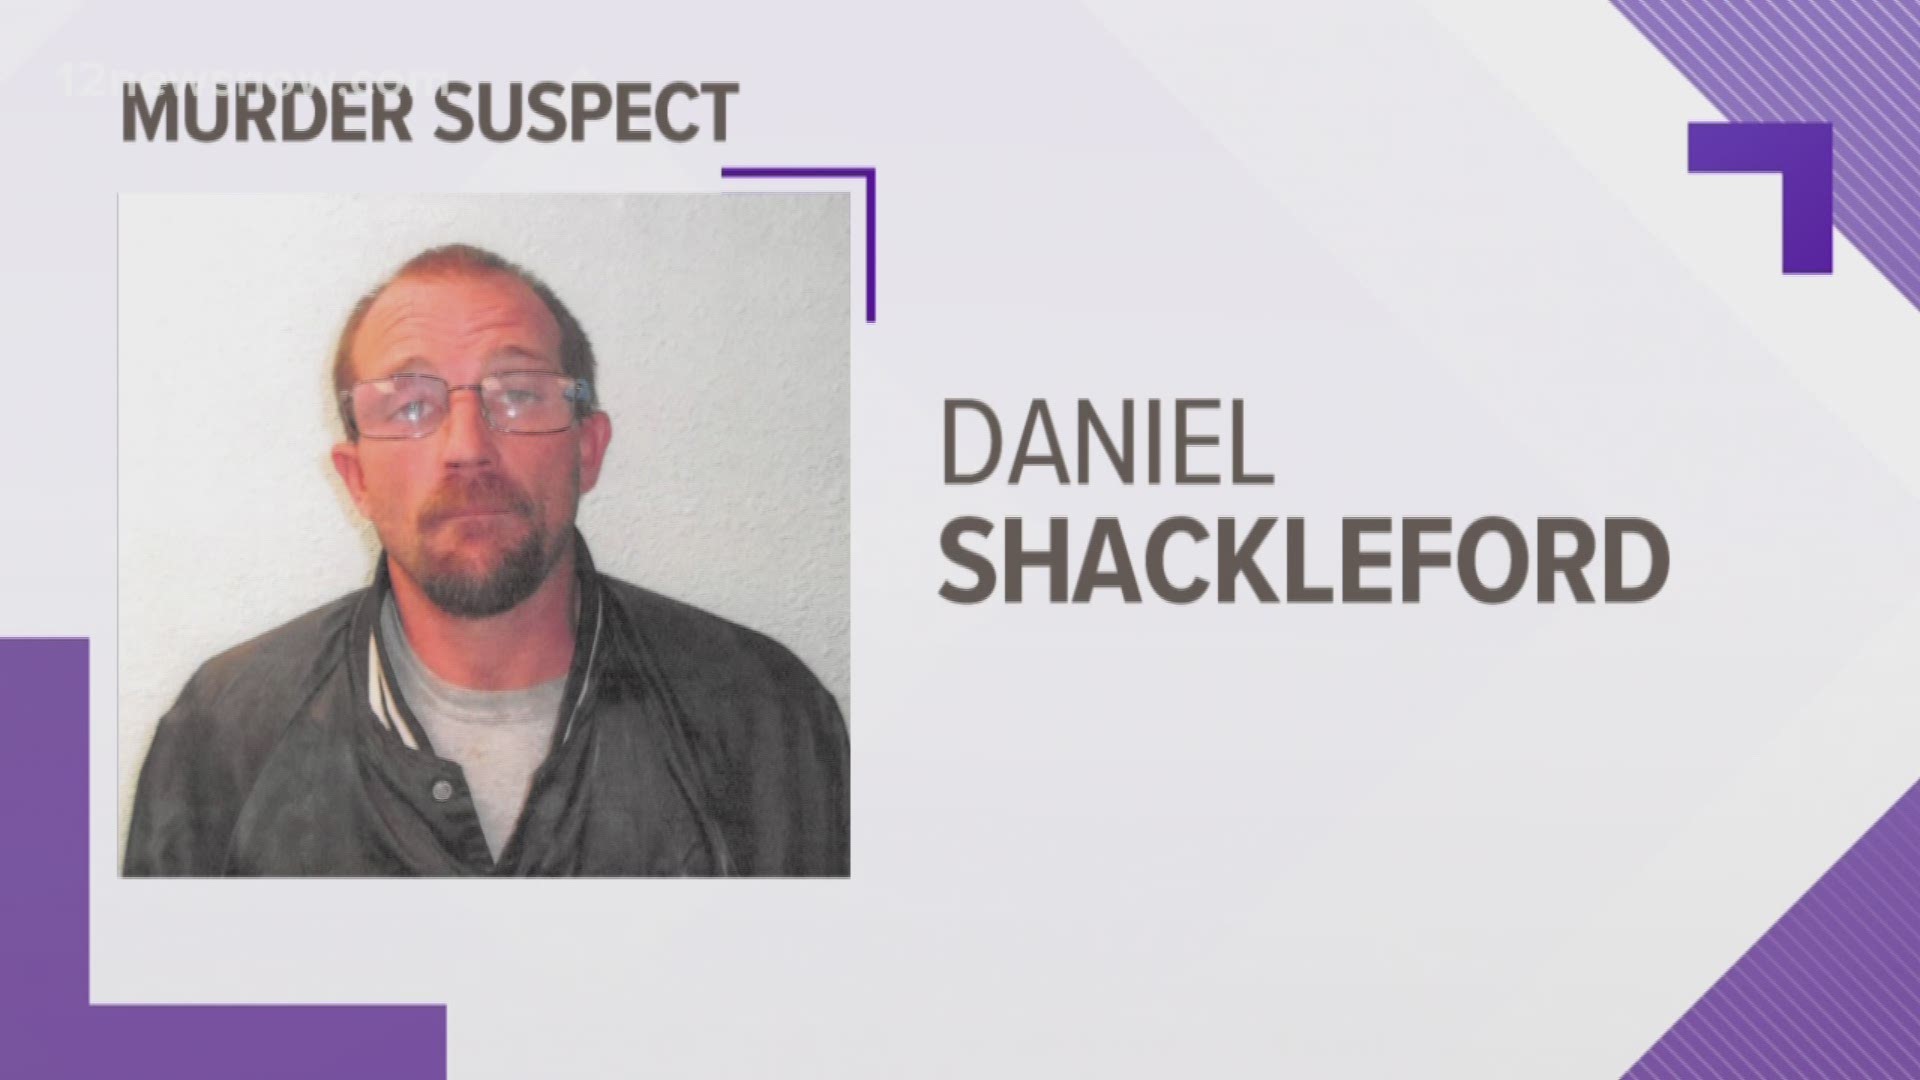 Police say Shackleford was in a relationship with the woman.